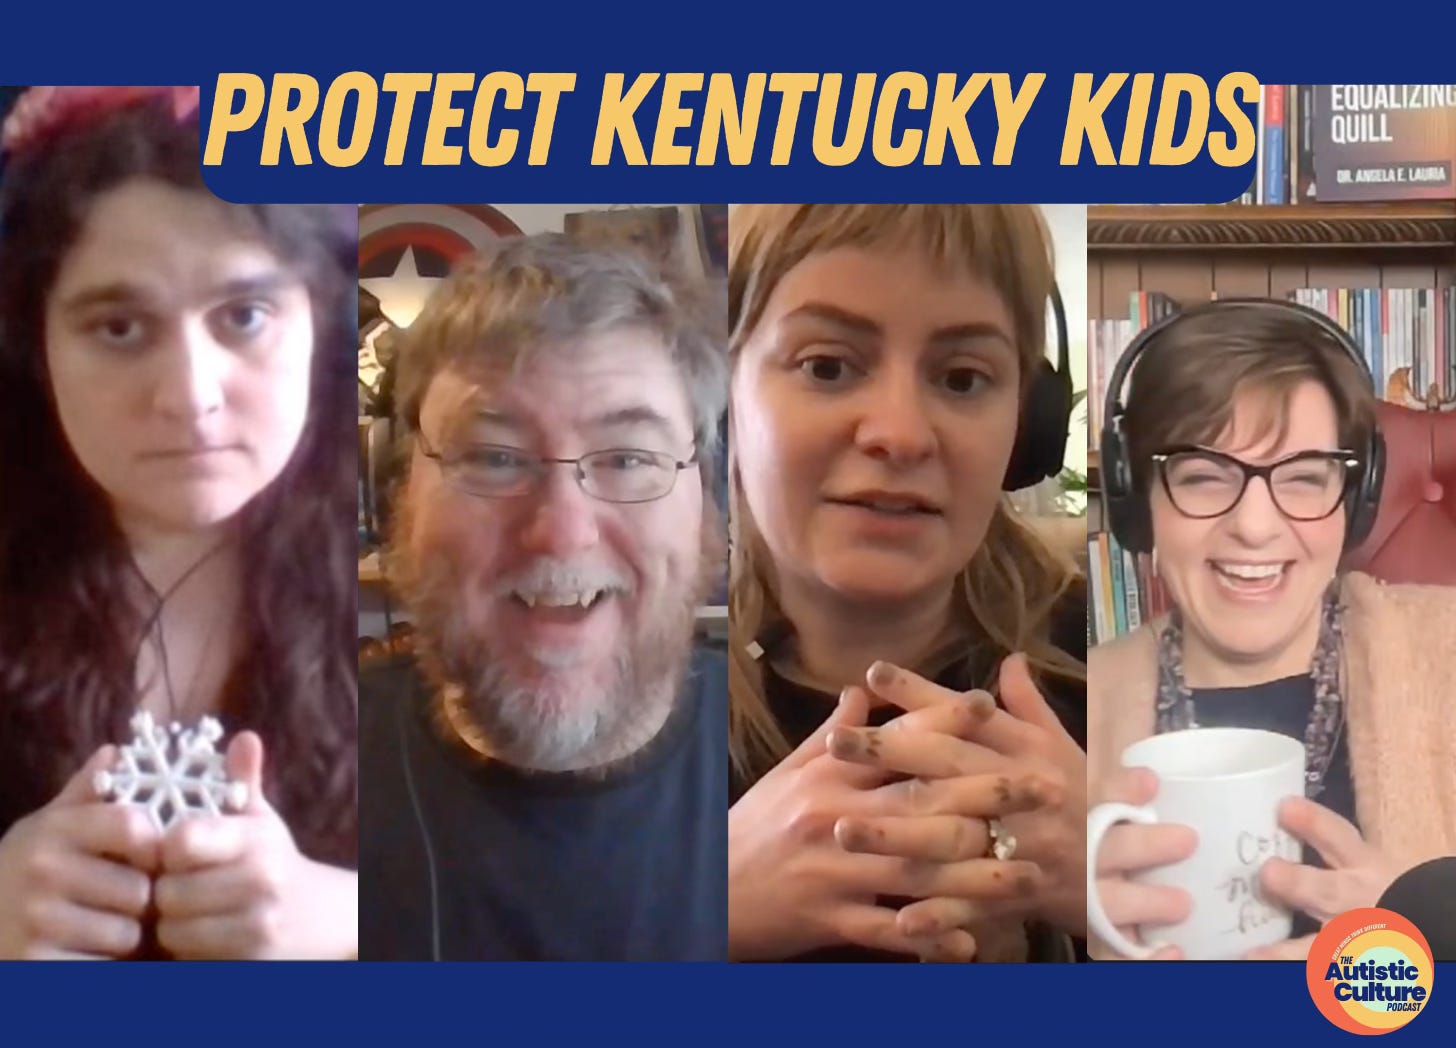 Autistic advocates make a podcast about hcr 51 a bill in Kentucky that would mandate ABA therapy in Kentucky schools, harming autistic children.